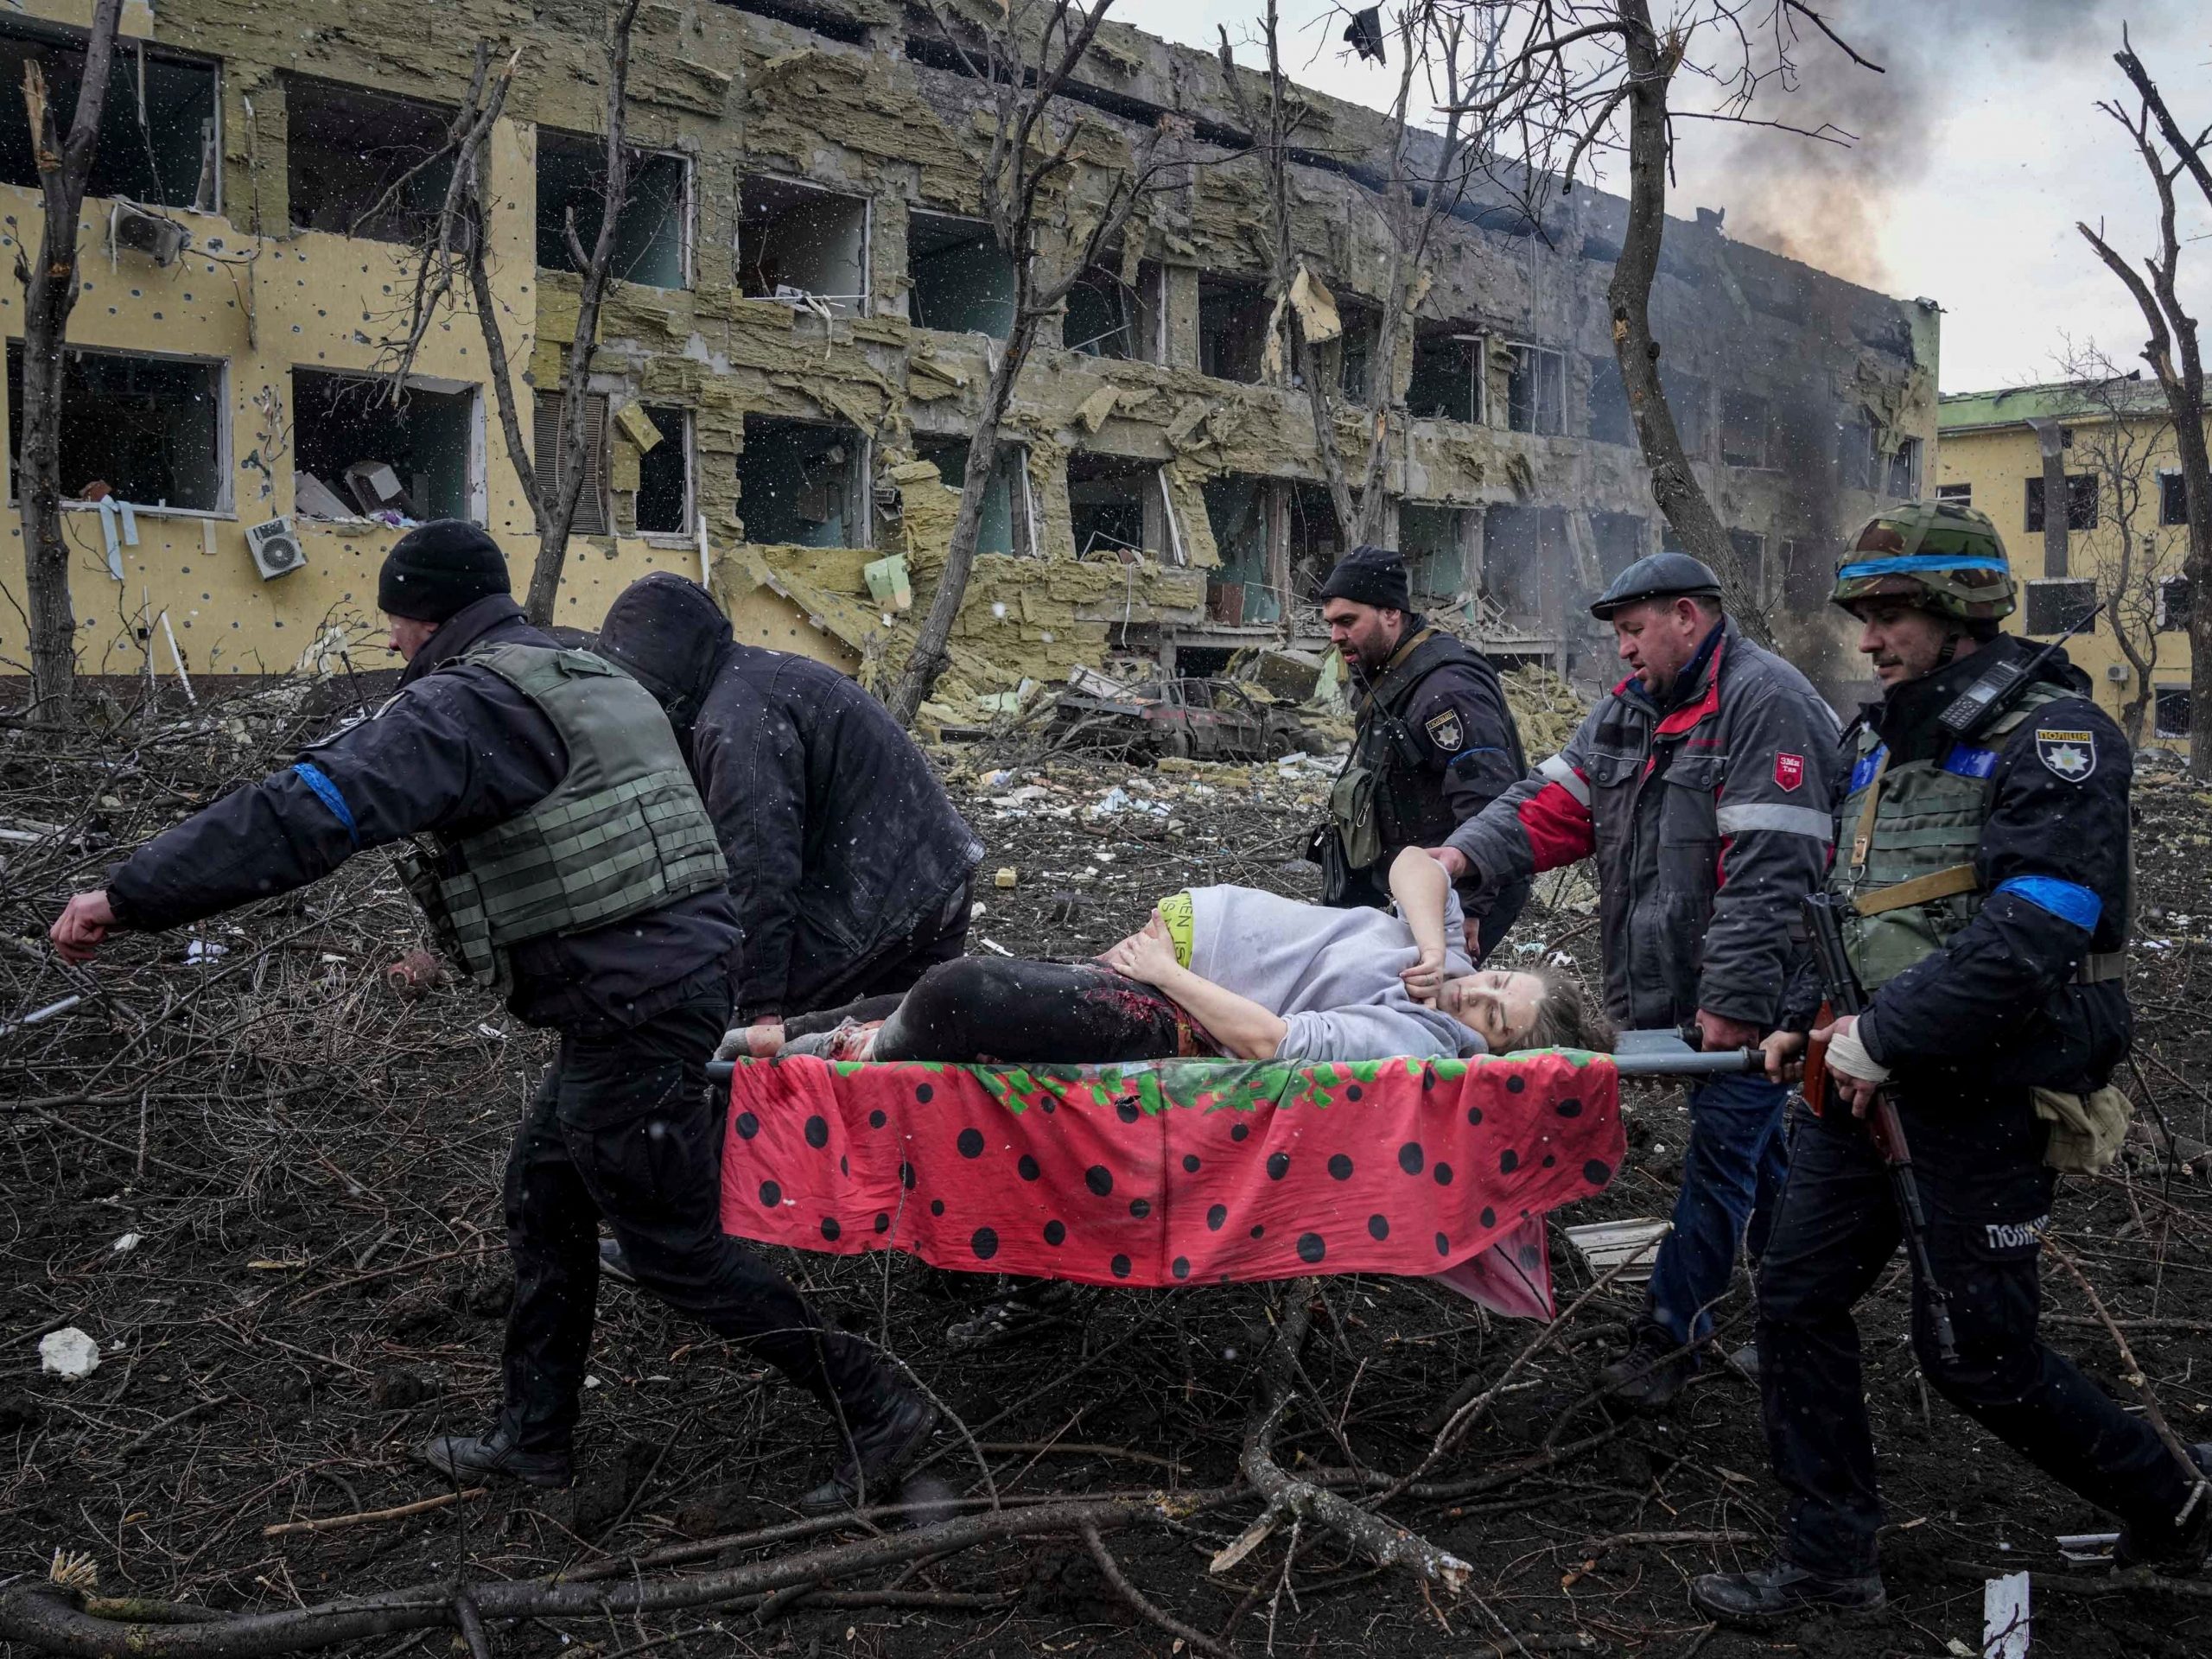 Ukrainian emergency employees and volunteers carry an injured pregnant woman from a maternity hospital that was damaged by shelling in Mariupol, Ukraine, March 9, 2022.